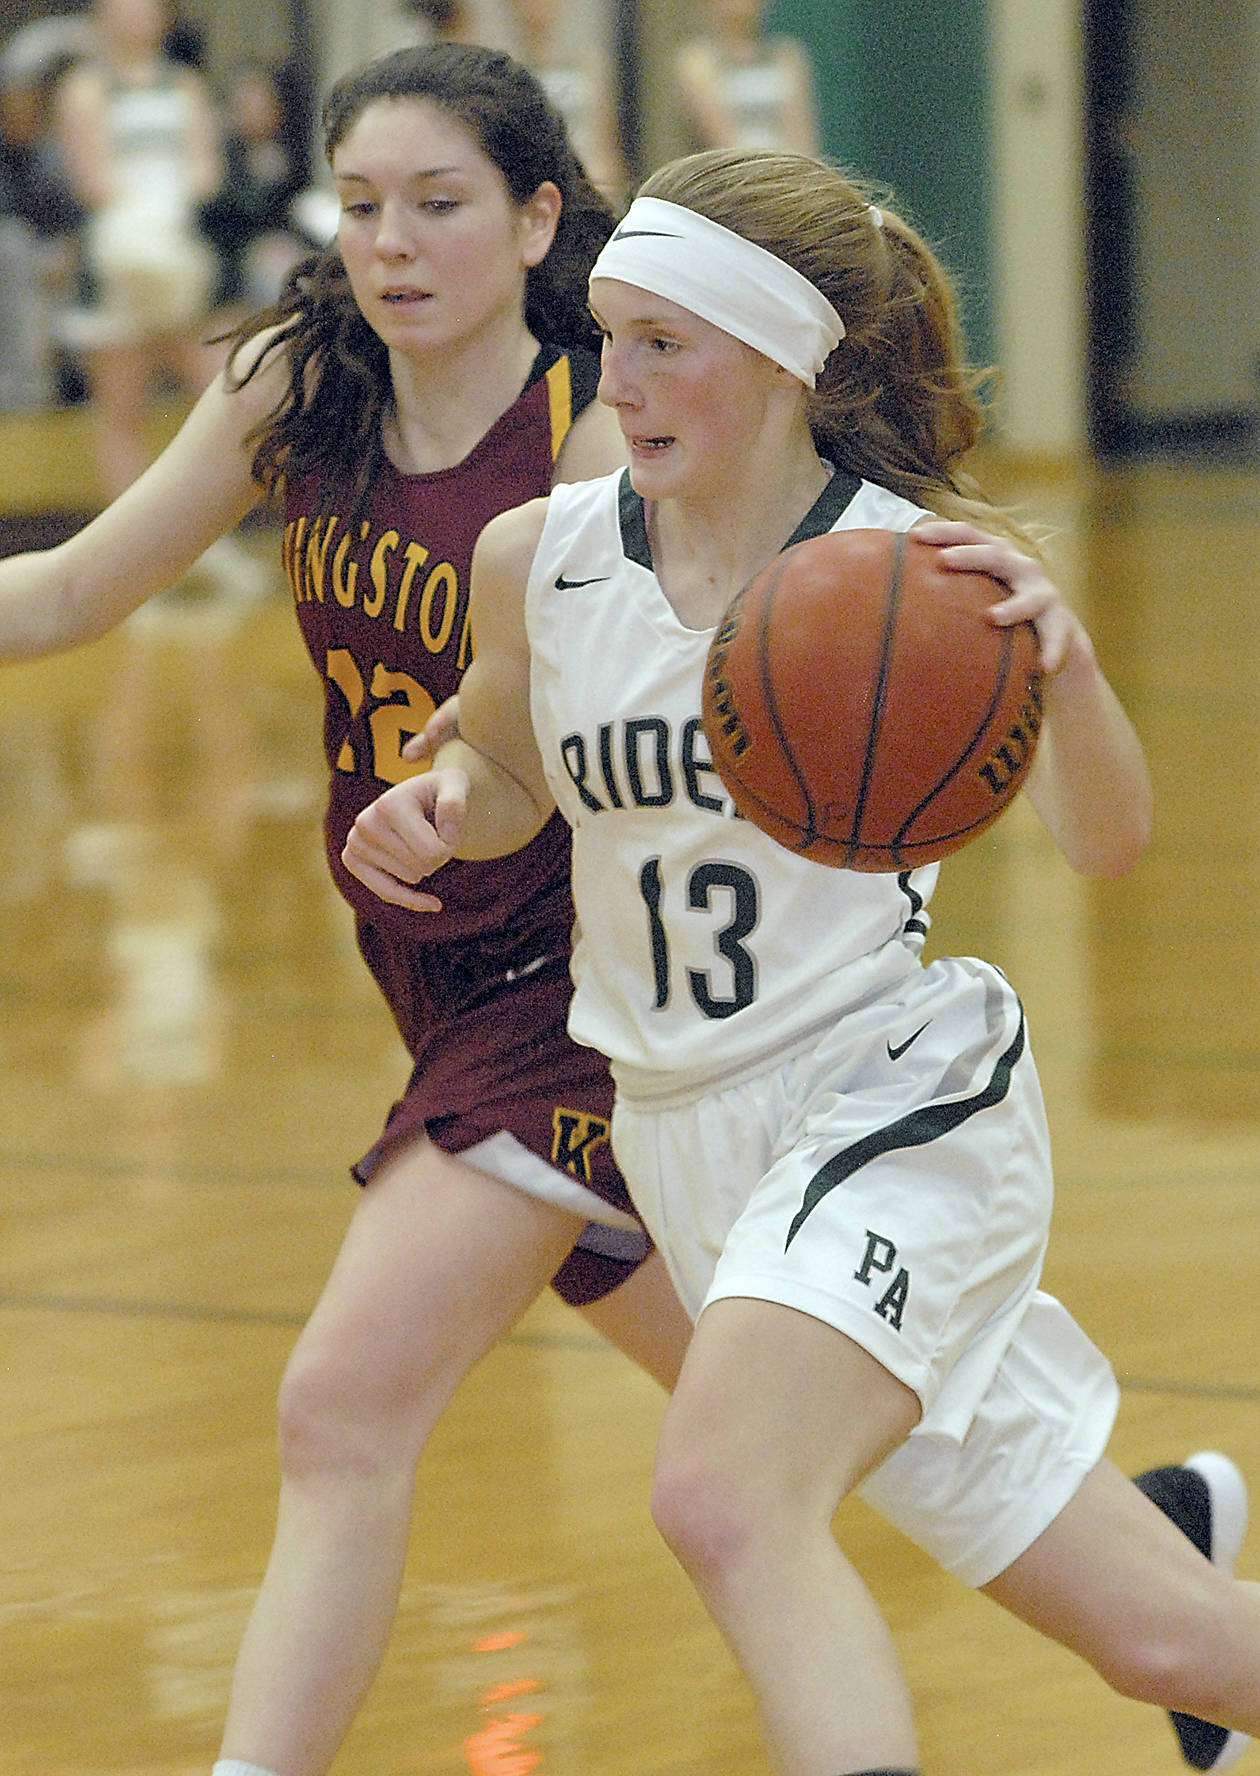 Port Angeles’ Millie Long sweeps past Kingston’s Lily Beaulieu in January at Port Angeles High School. Long, just a freshman, was named Olympic League 2A Division MVP.